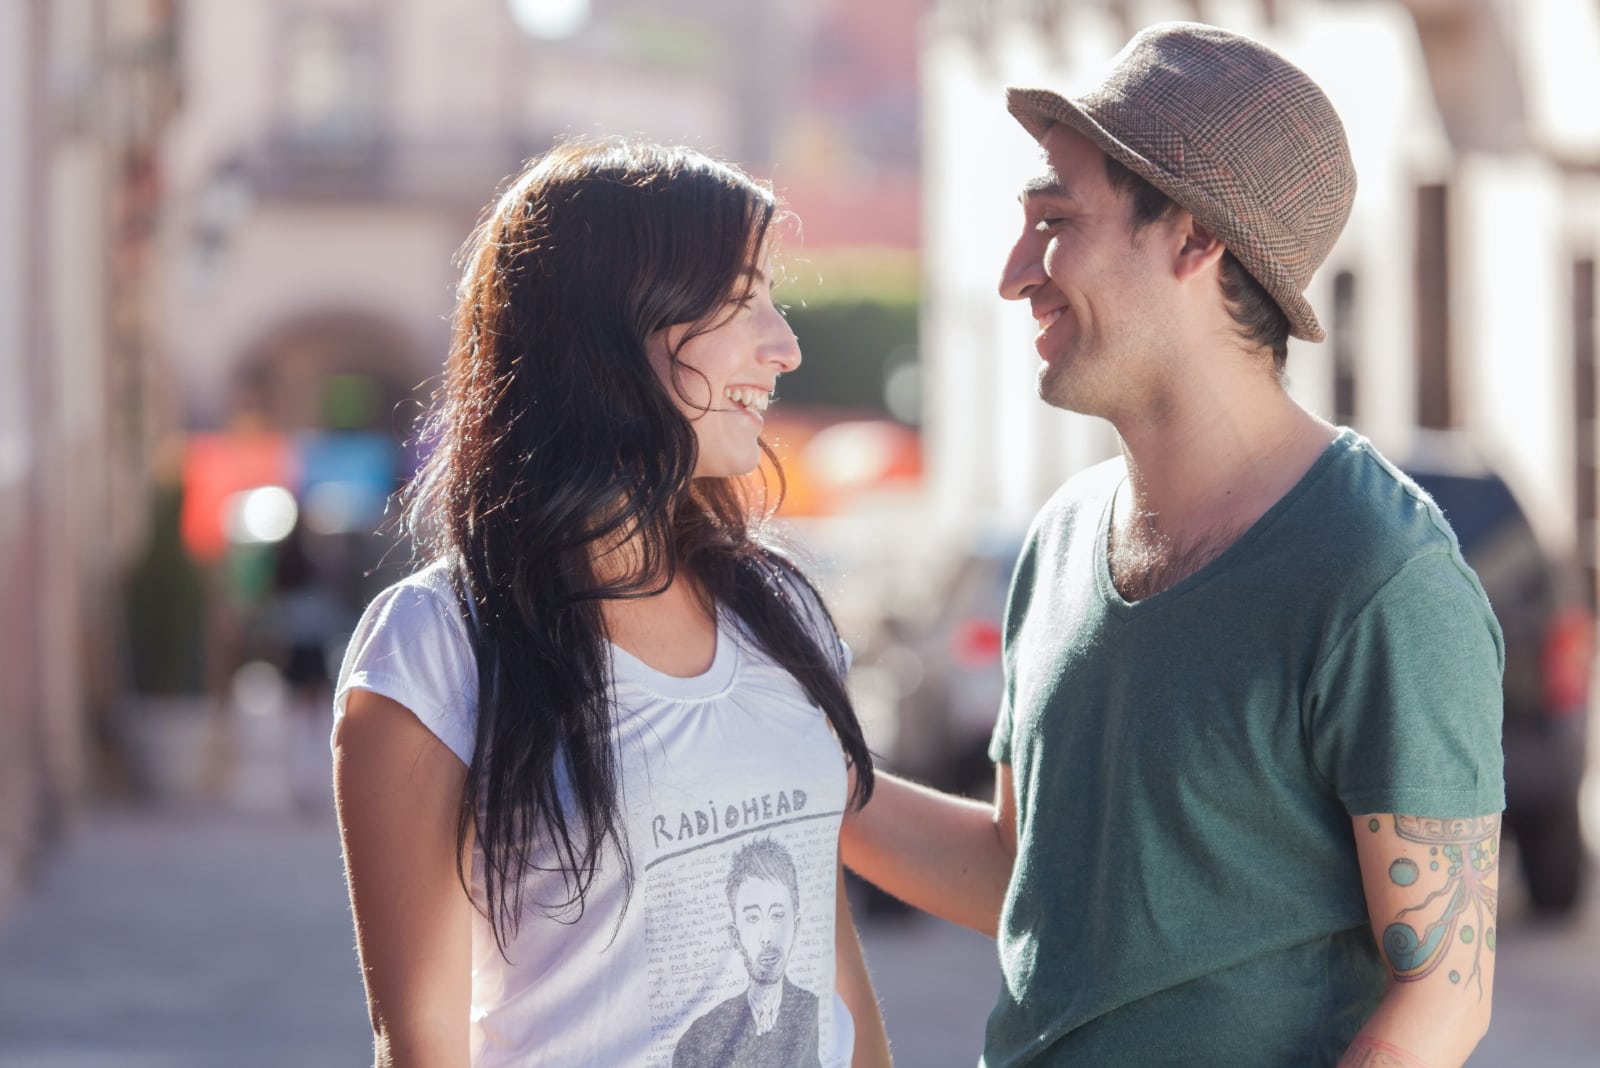 How To Make Him Want You: 31 Proven Ways To Get Him Hooked